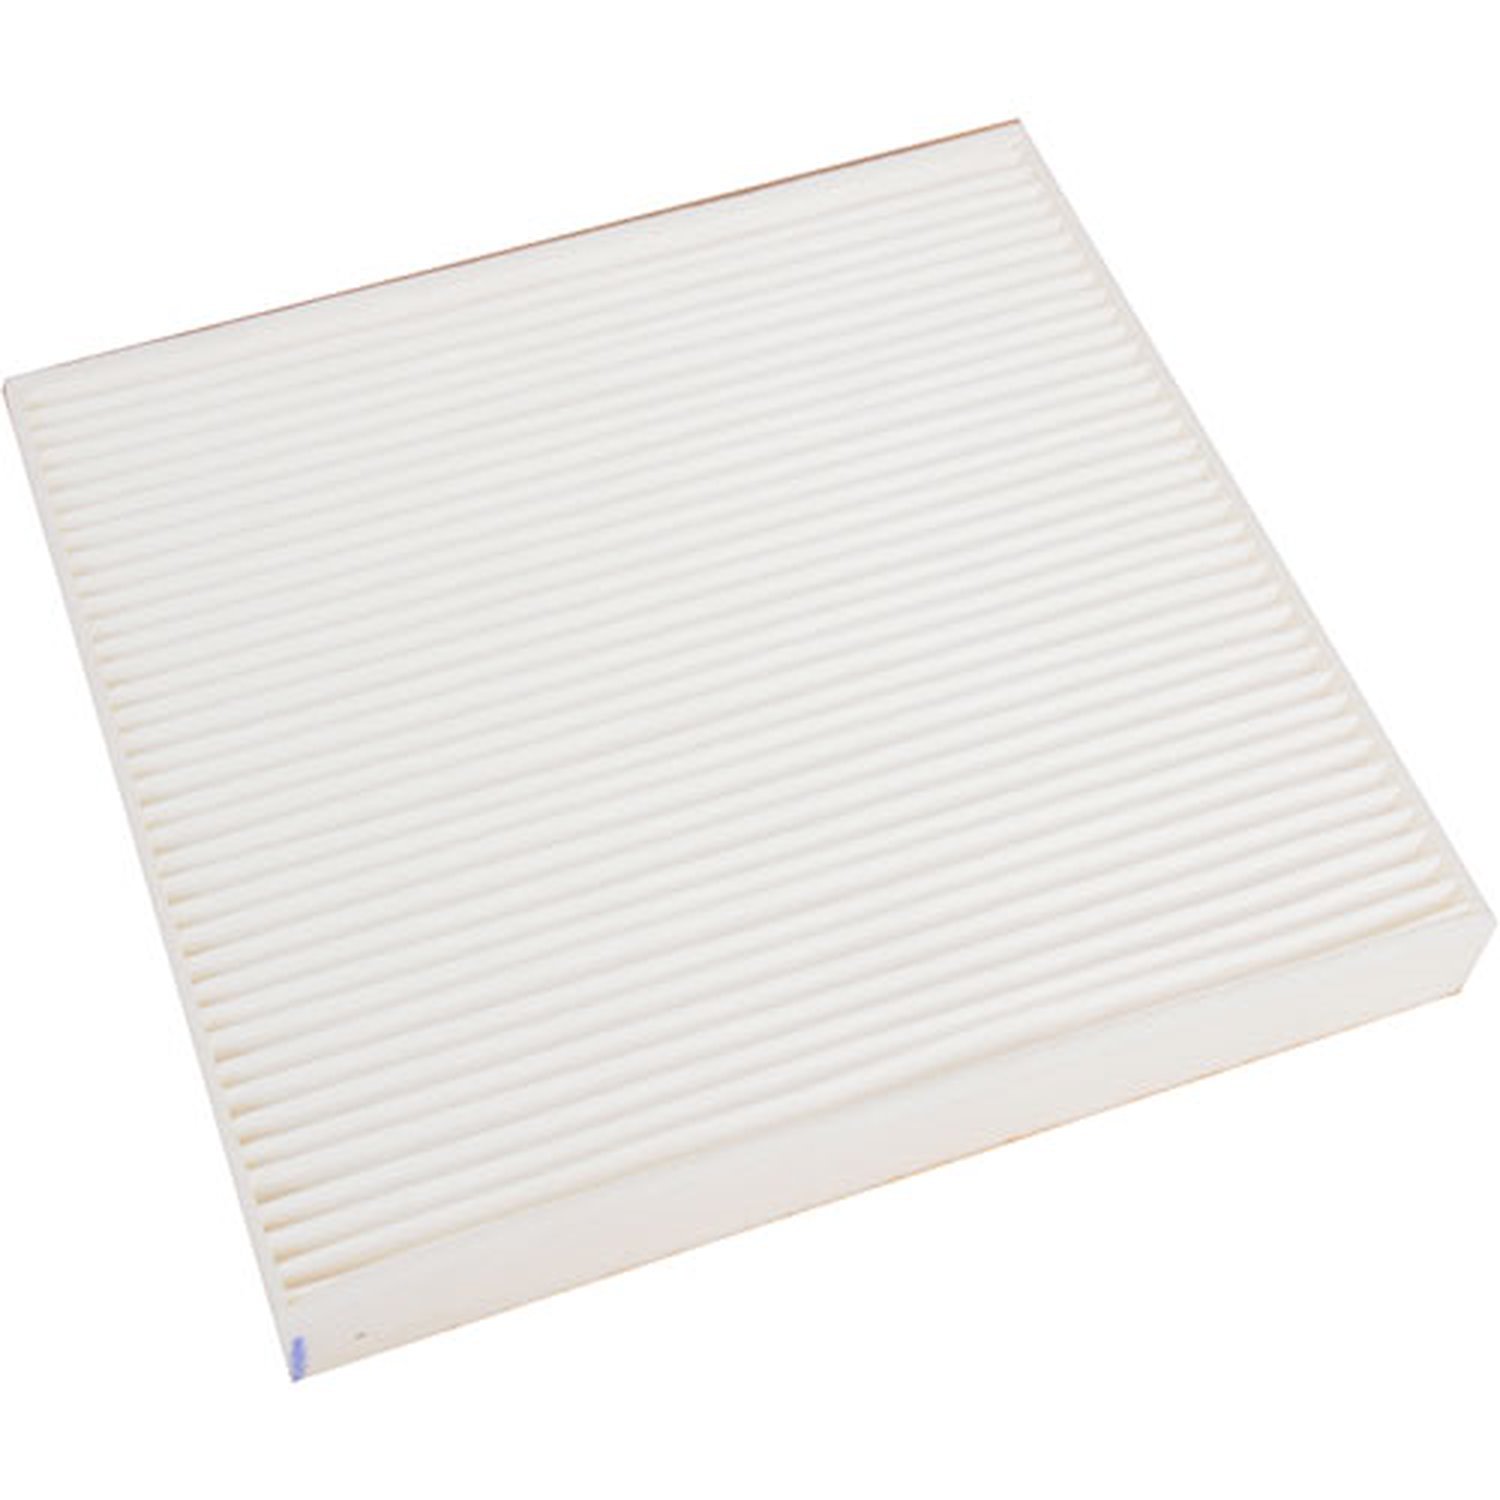 Cabin Air Filter Fits Select 2014-2020 Cadillac, Chevrolet,